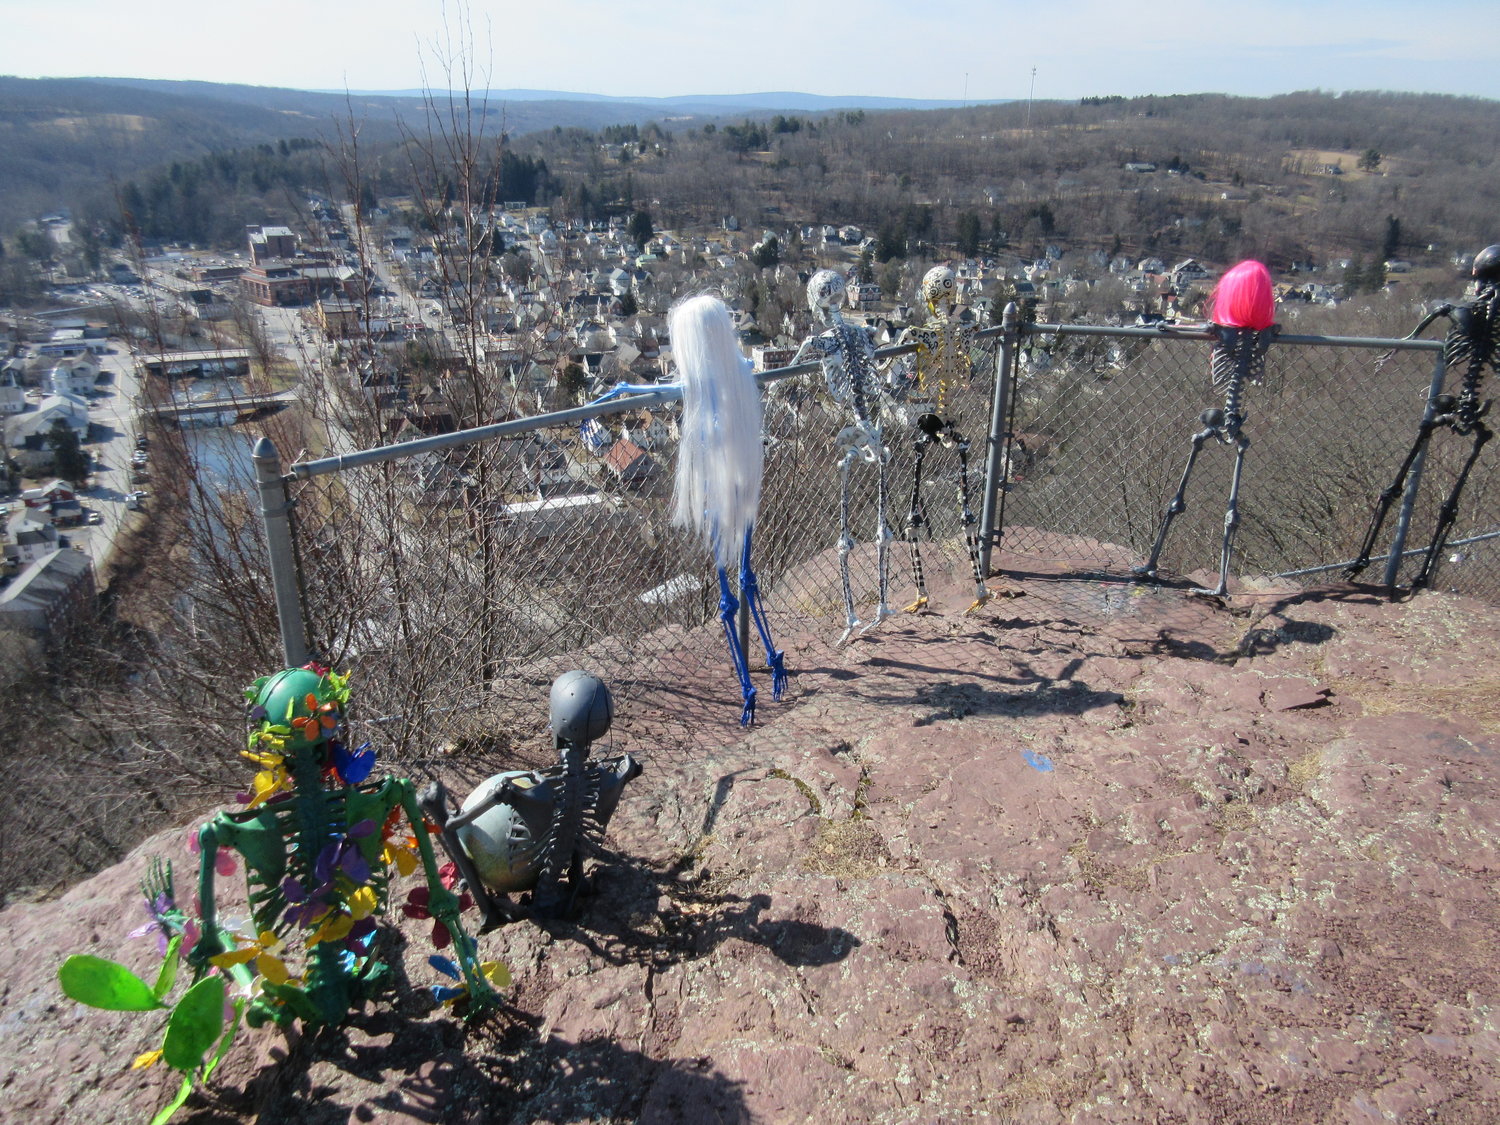 The skeletons enjoy an outing at Irving Cliff.